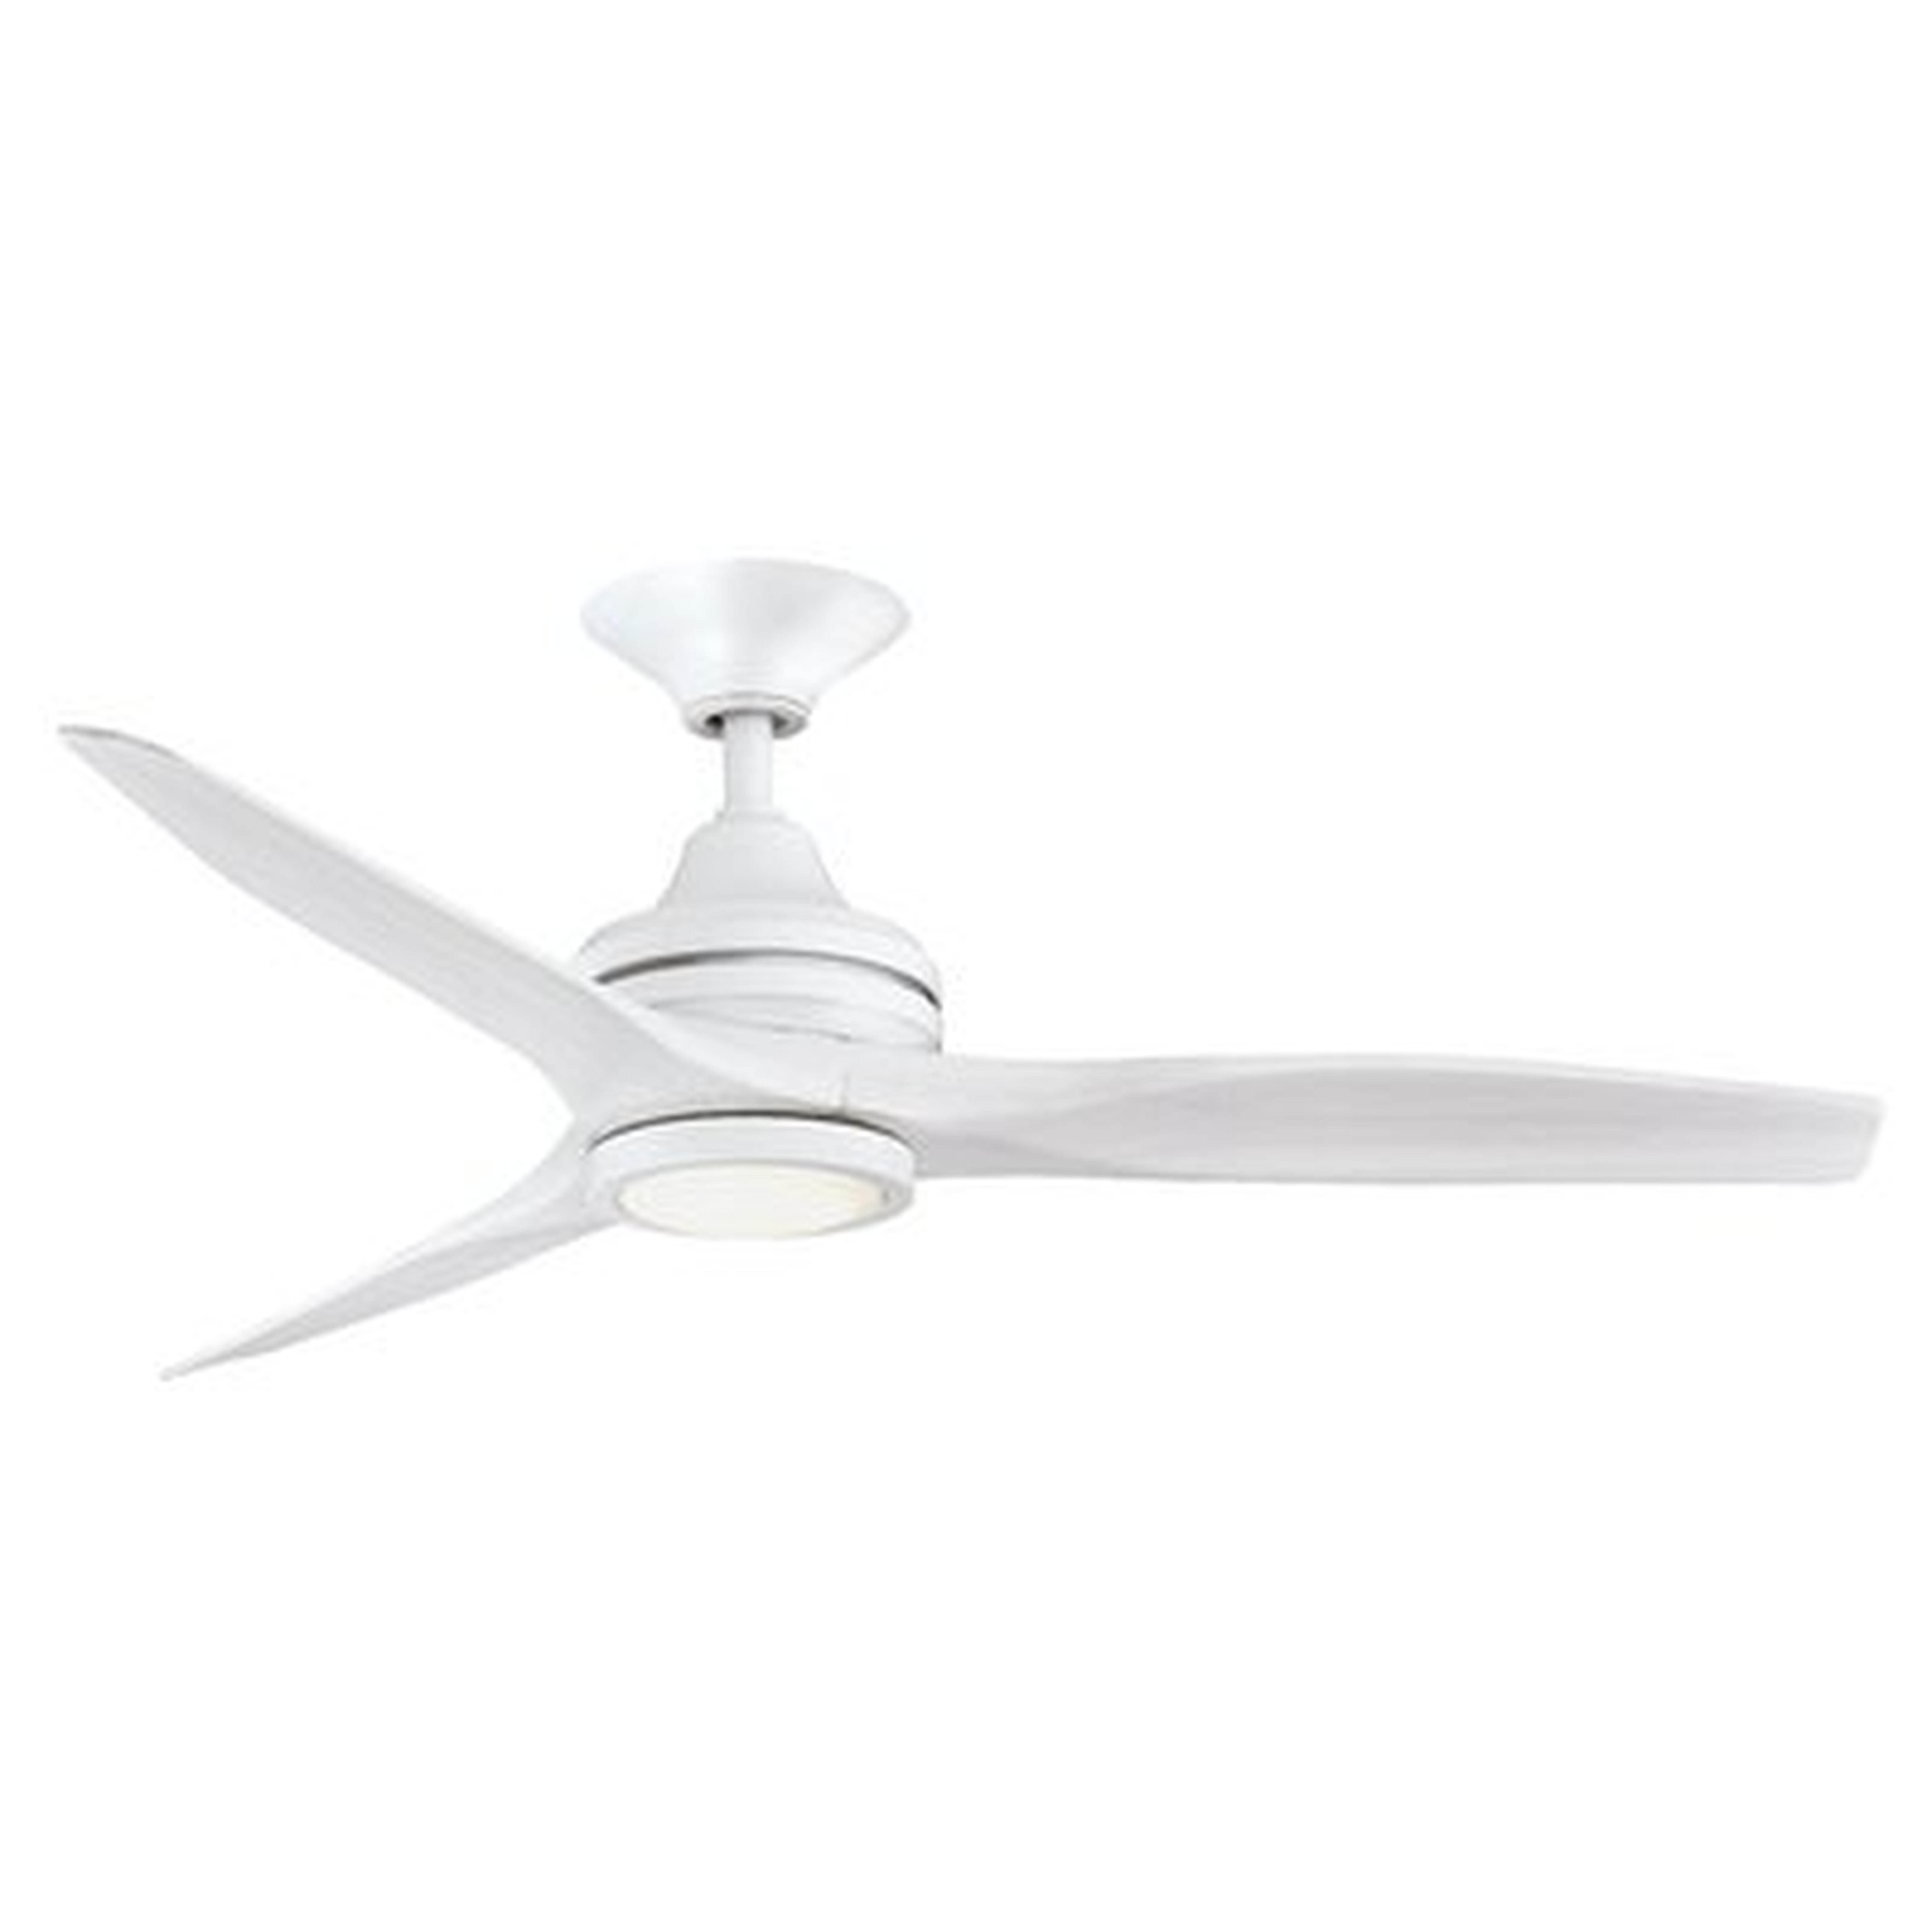 Spitfire Propeller Ceiling Fan Motor with Remote Control - Wayfair